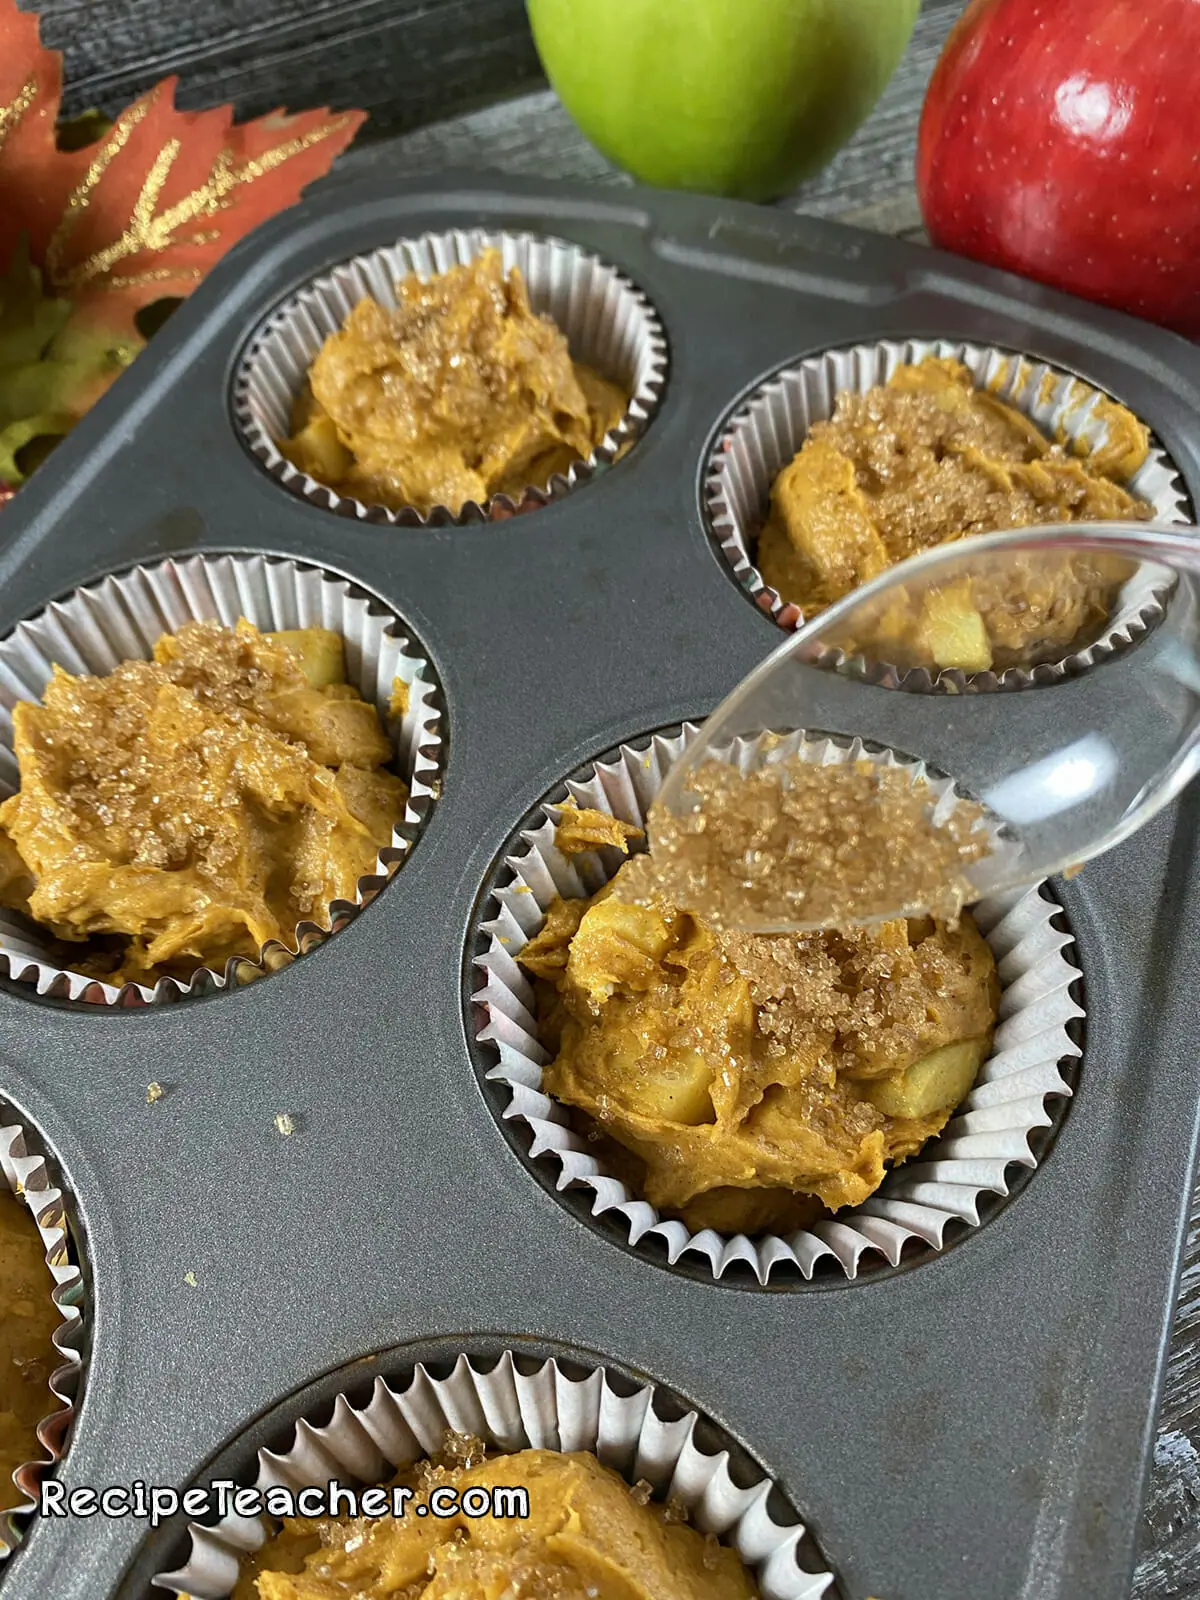 Recipe for pumpkin spice and apple muffins